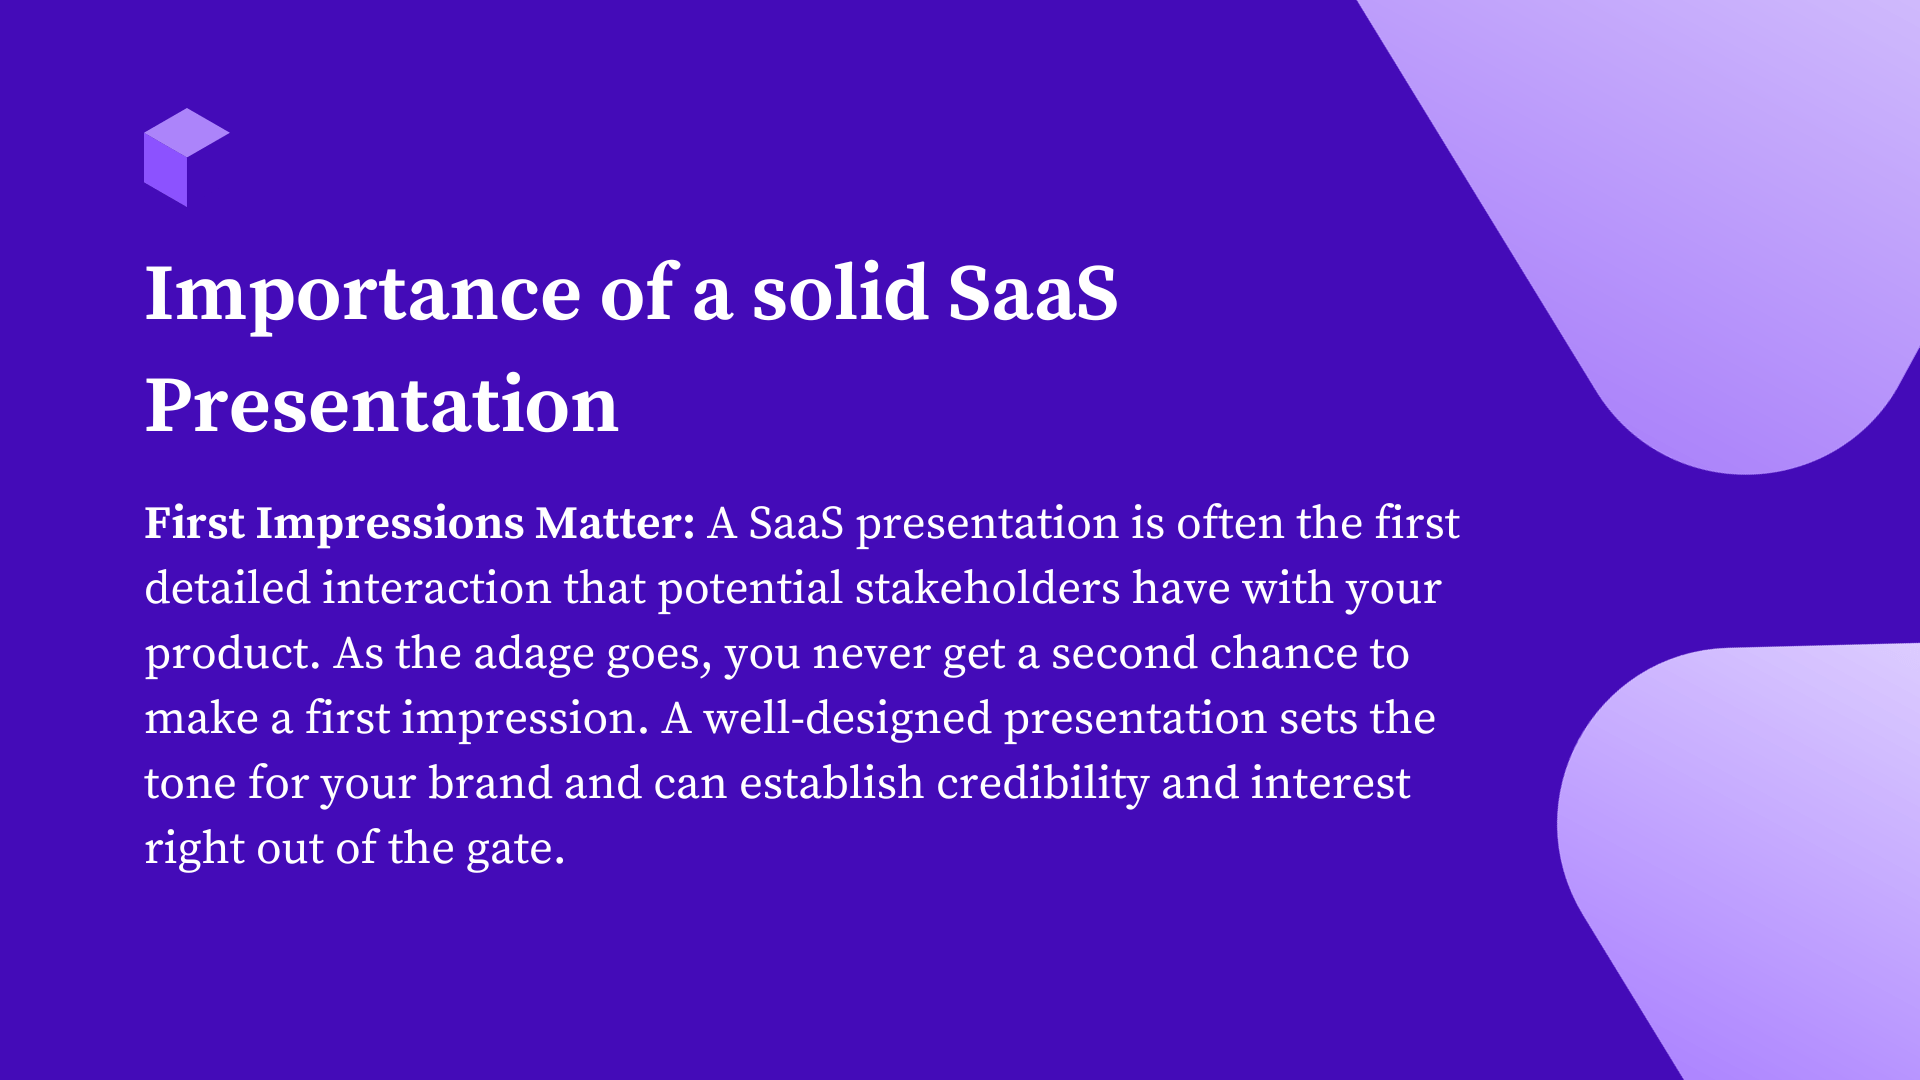 Importance of a solid SaaS Presentation